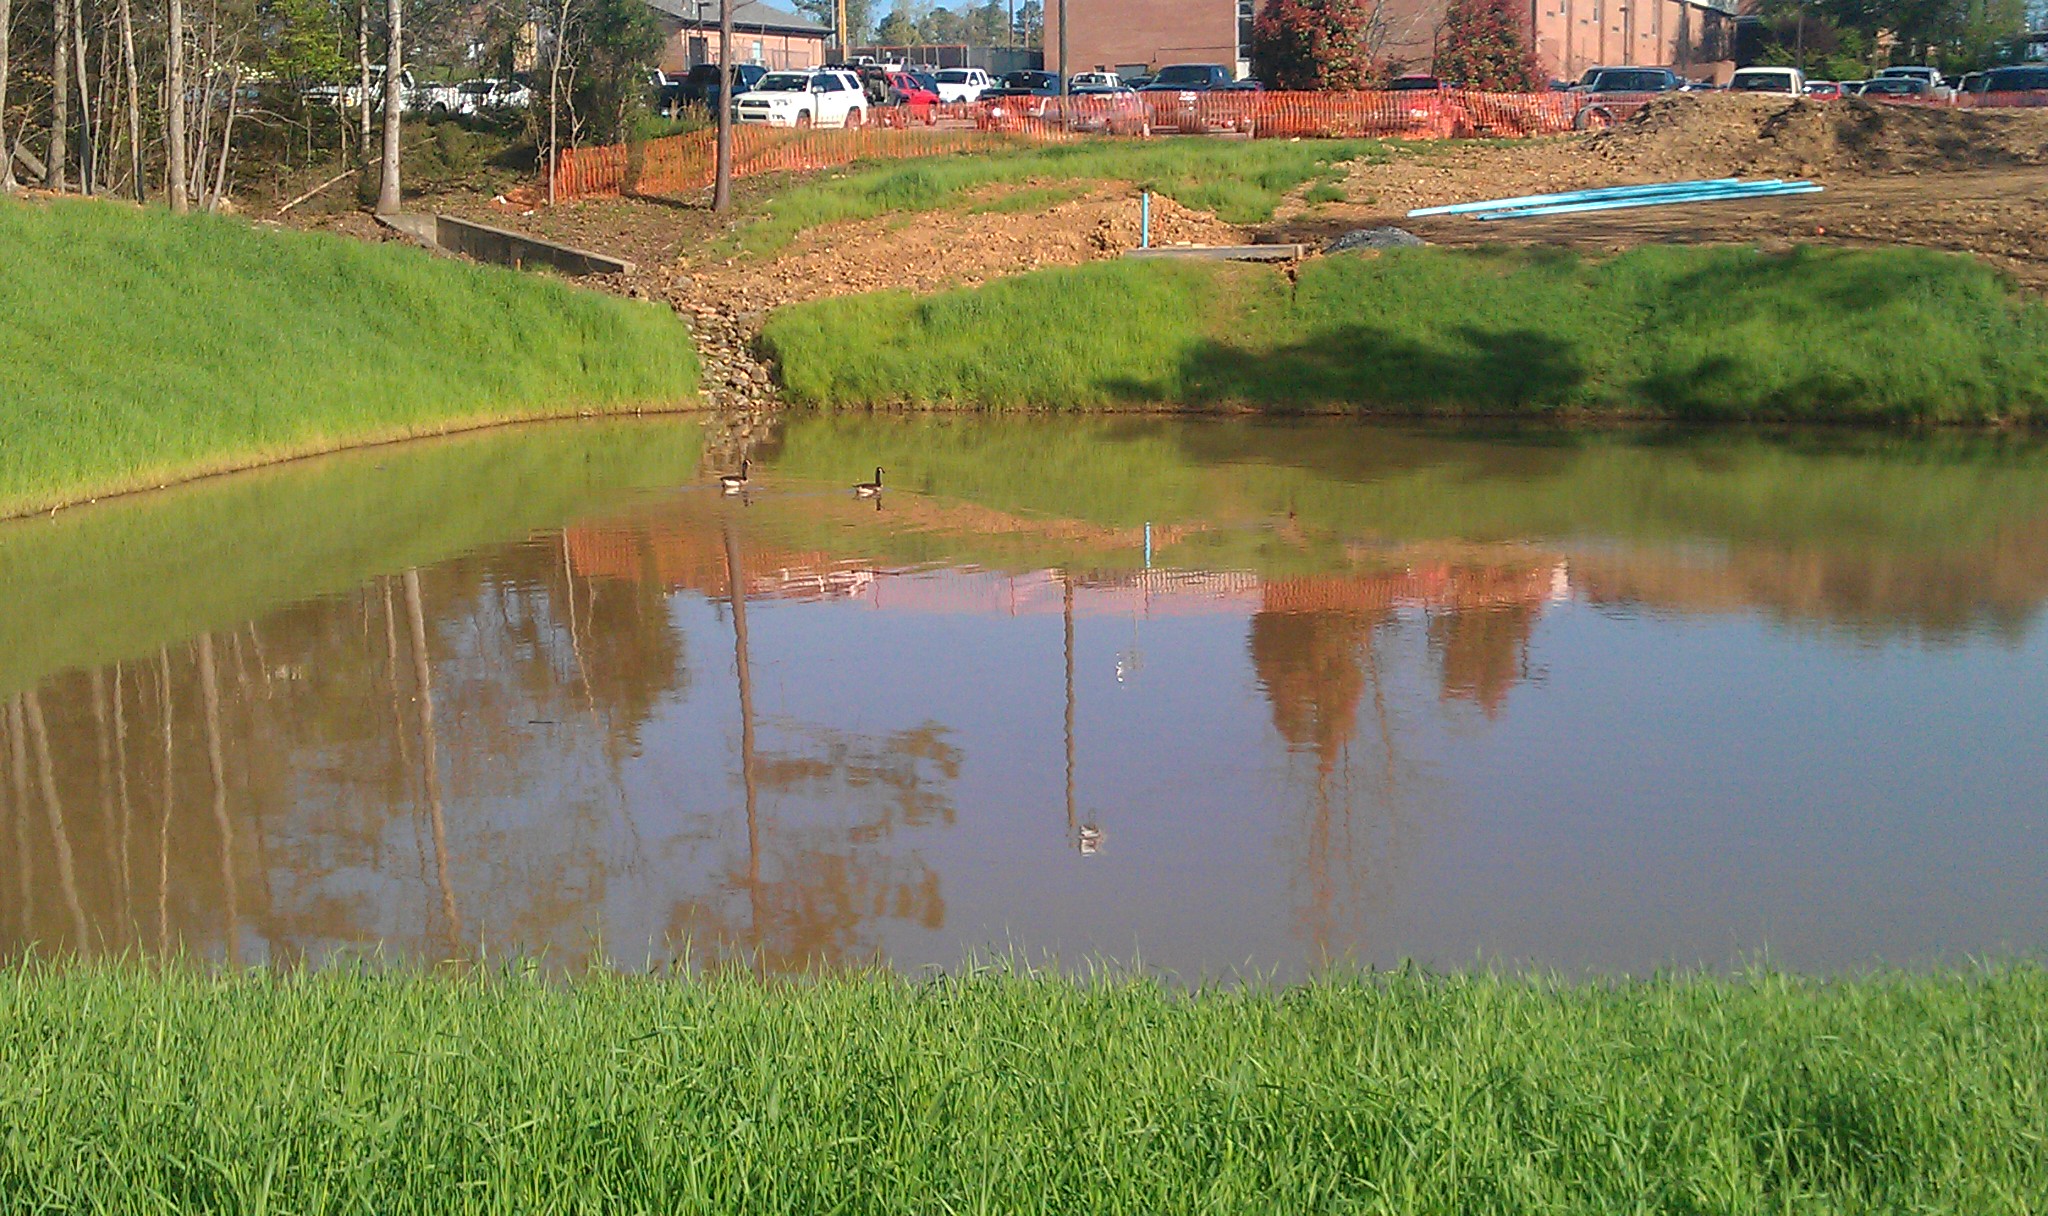 A pond to capture and store water for irrigation.